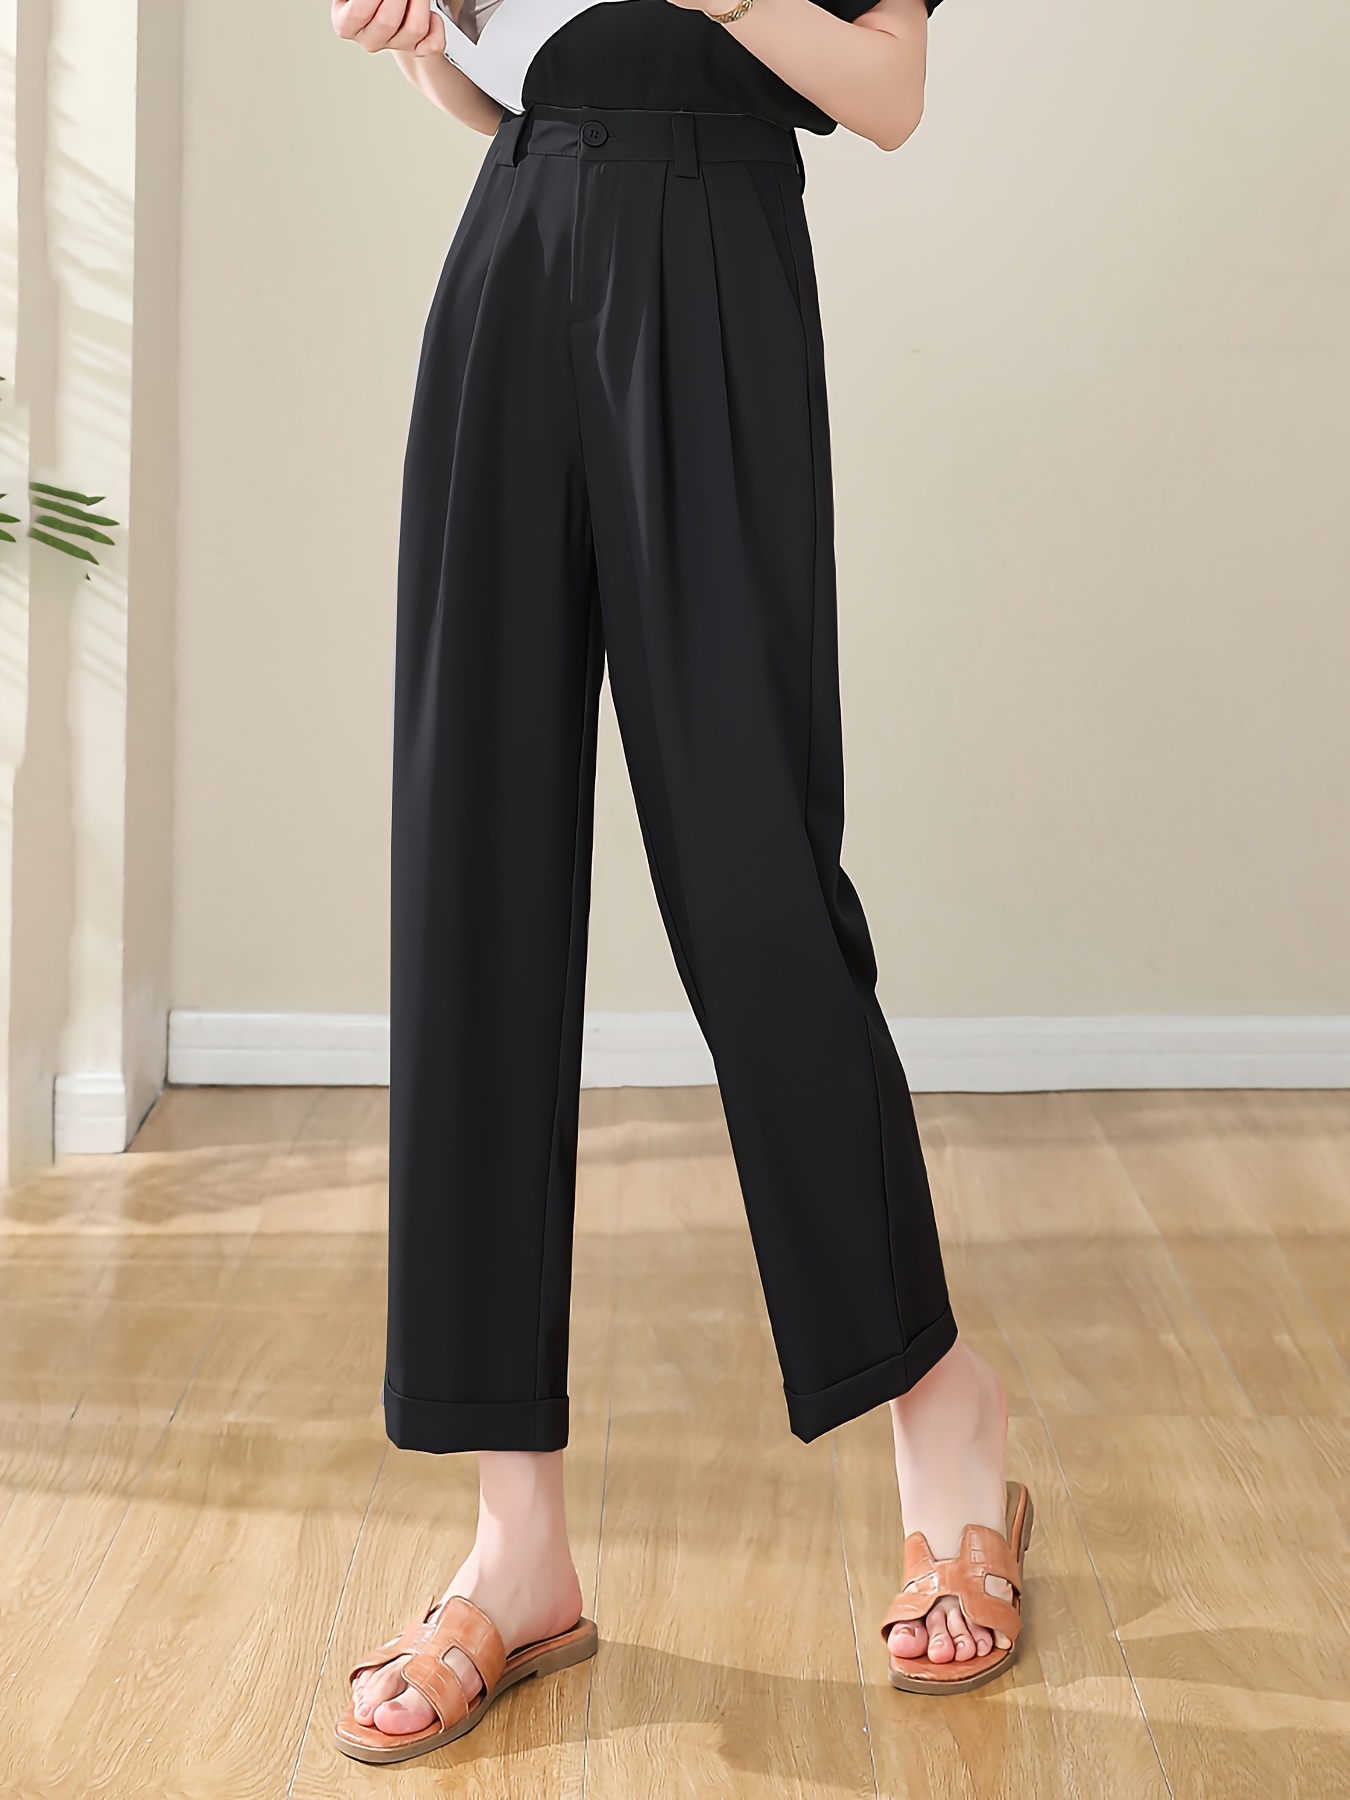 Women Suit Pants High Waist Pleated Pockets Business Trousers